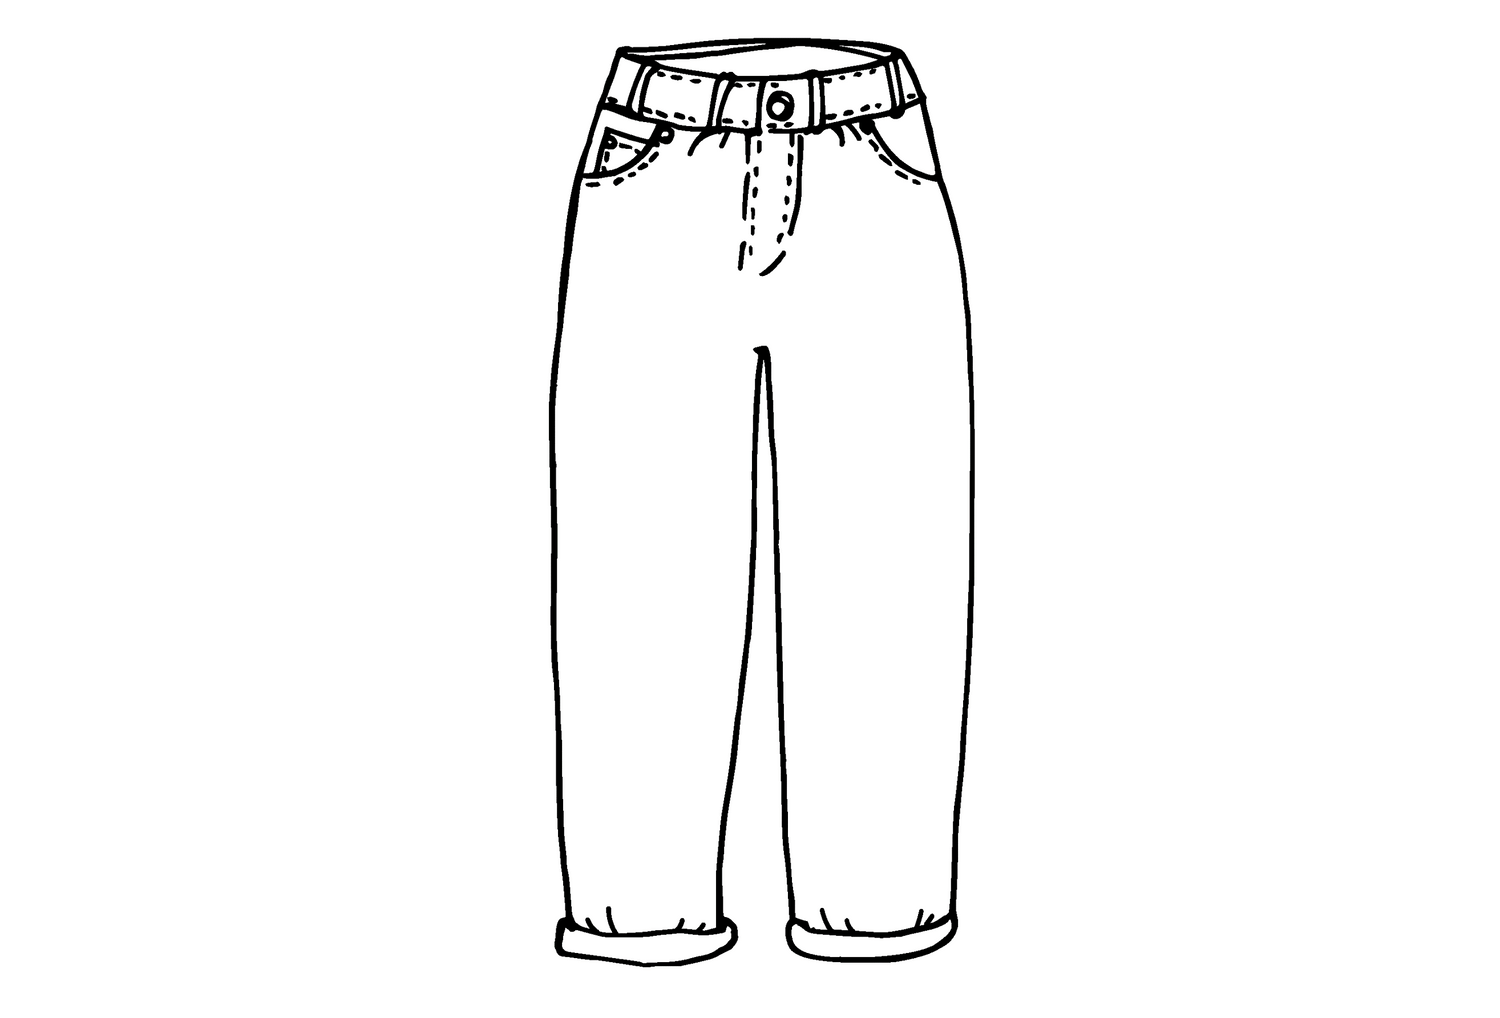 Loose fit Jeans